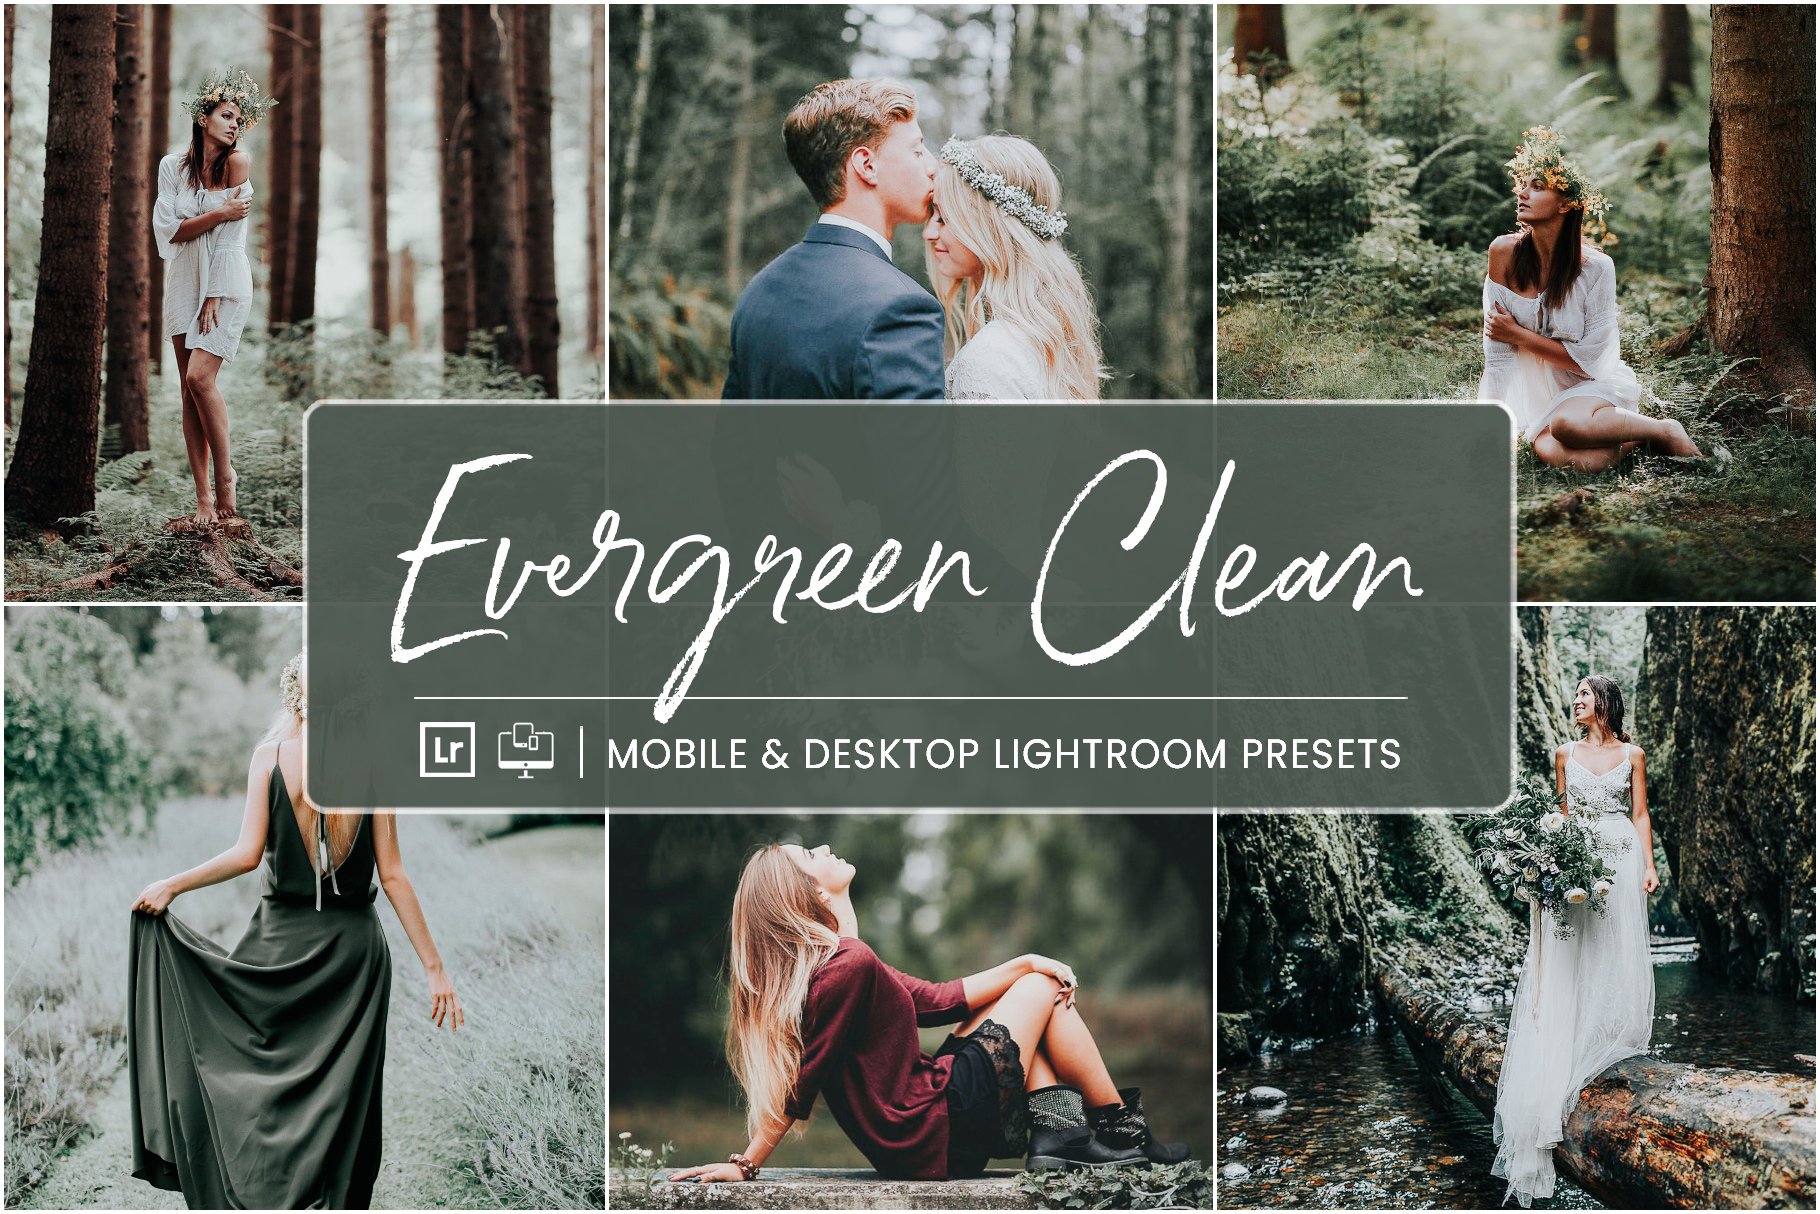 EVERGREEN CLEAN LIGHTROOM PRESETScover image.